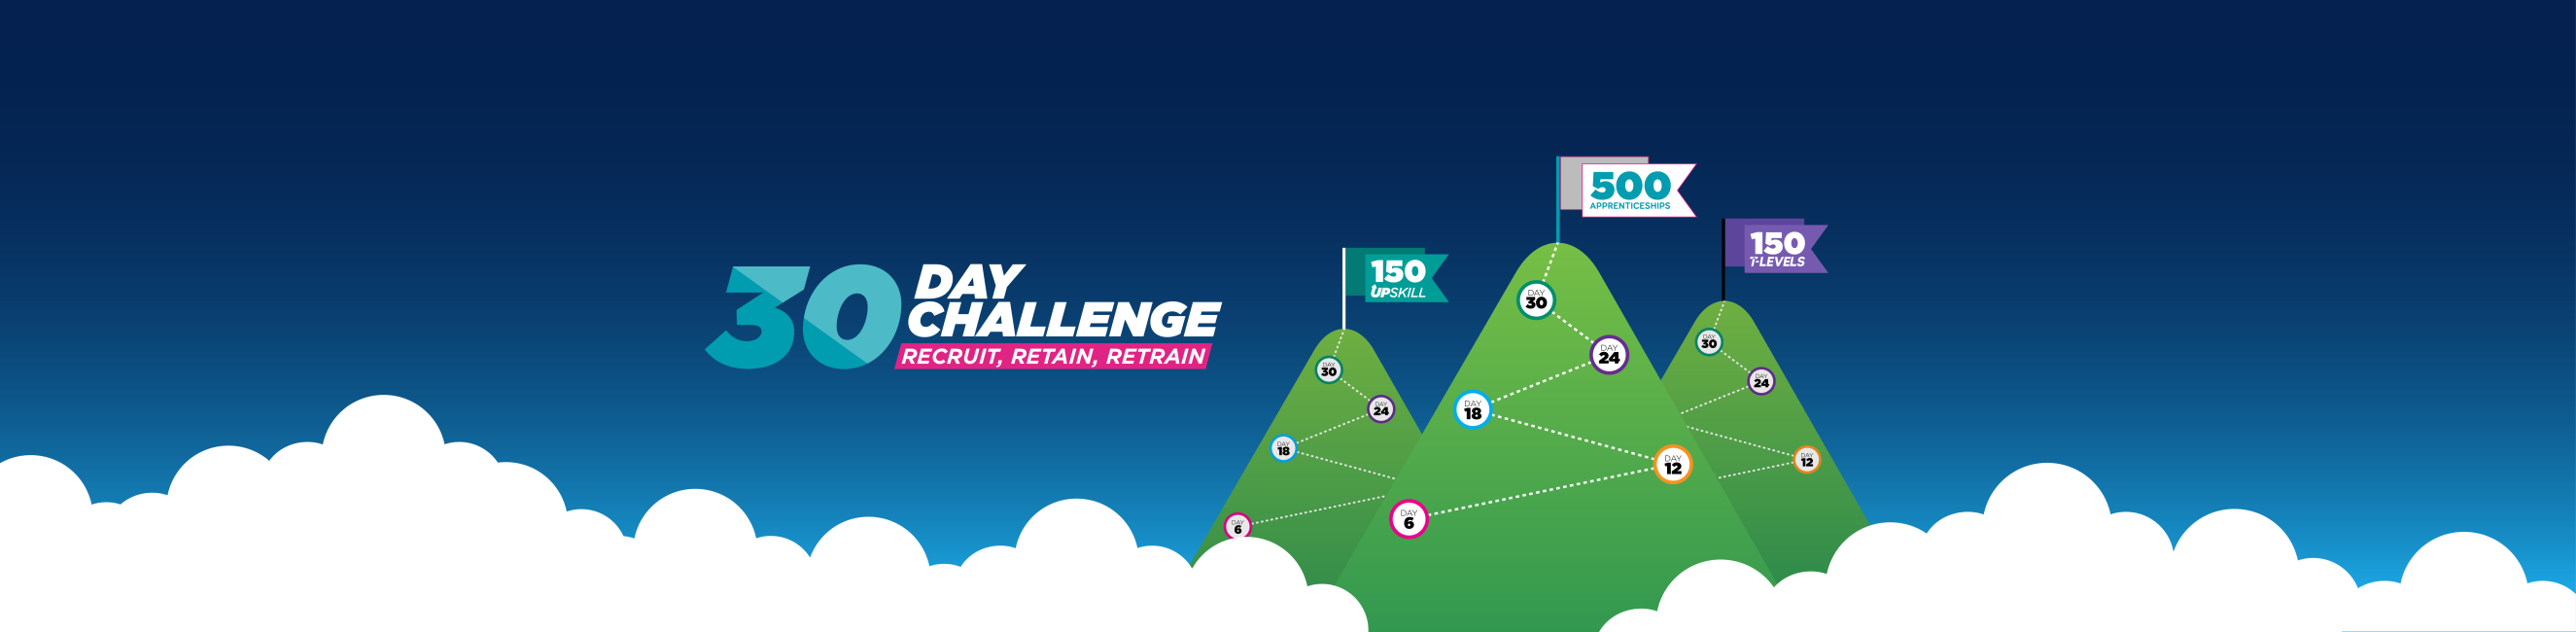 30 Day Challenge - recruit, retain, retrain. 3 mountains each with steps and goals, representing each 30 day challenge